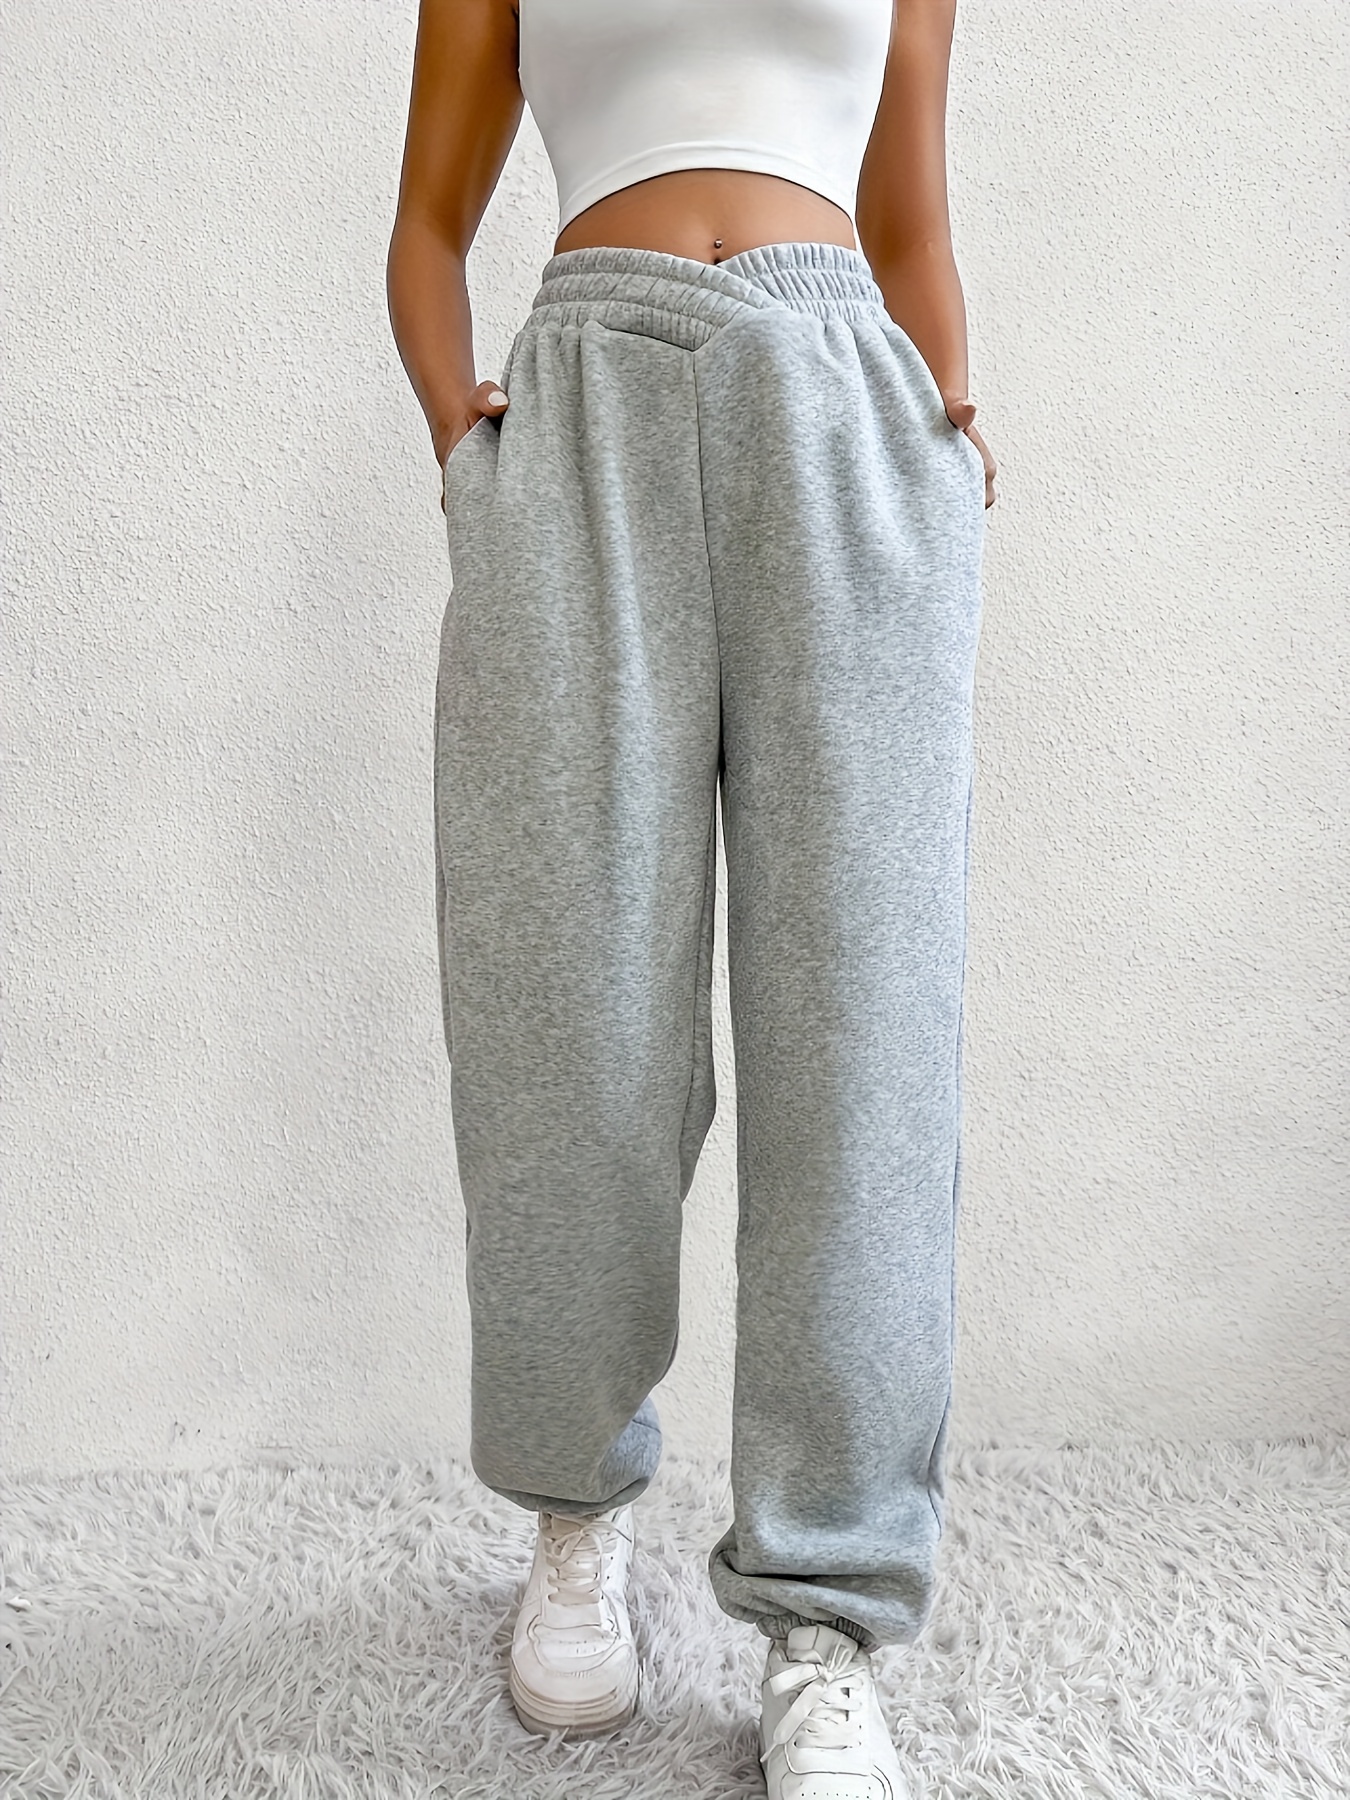 Sweatpants Women Baggy Wide Leg Baggy High Waisted Joggers Trousers With  Pockets Drawstring Track Pants 